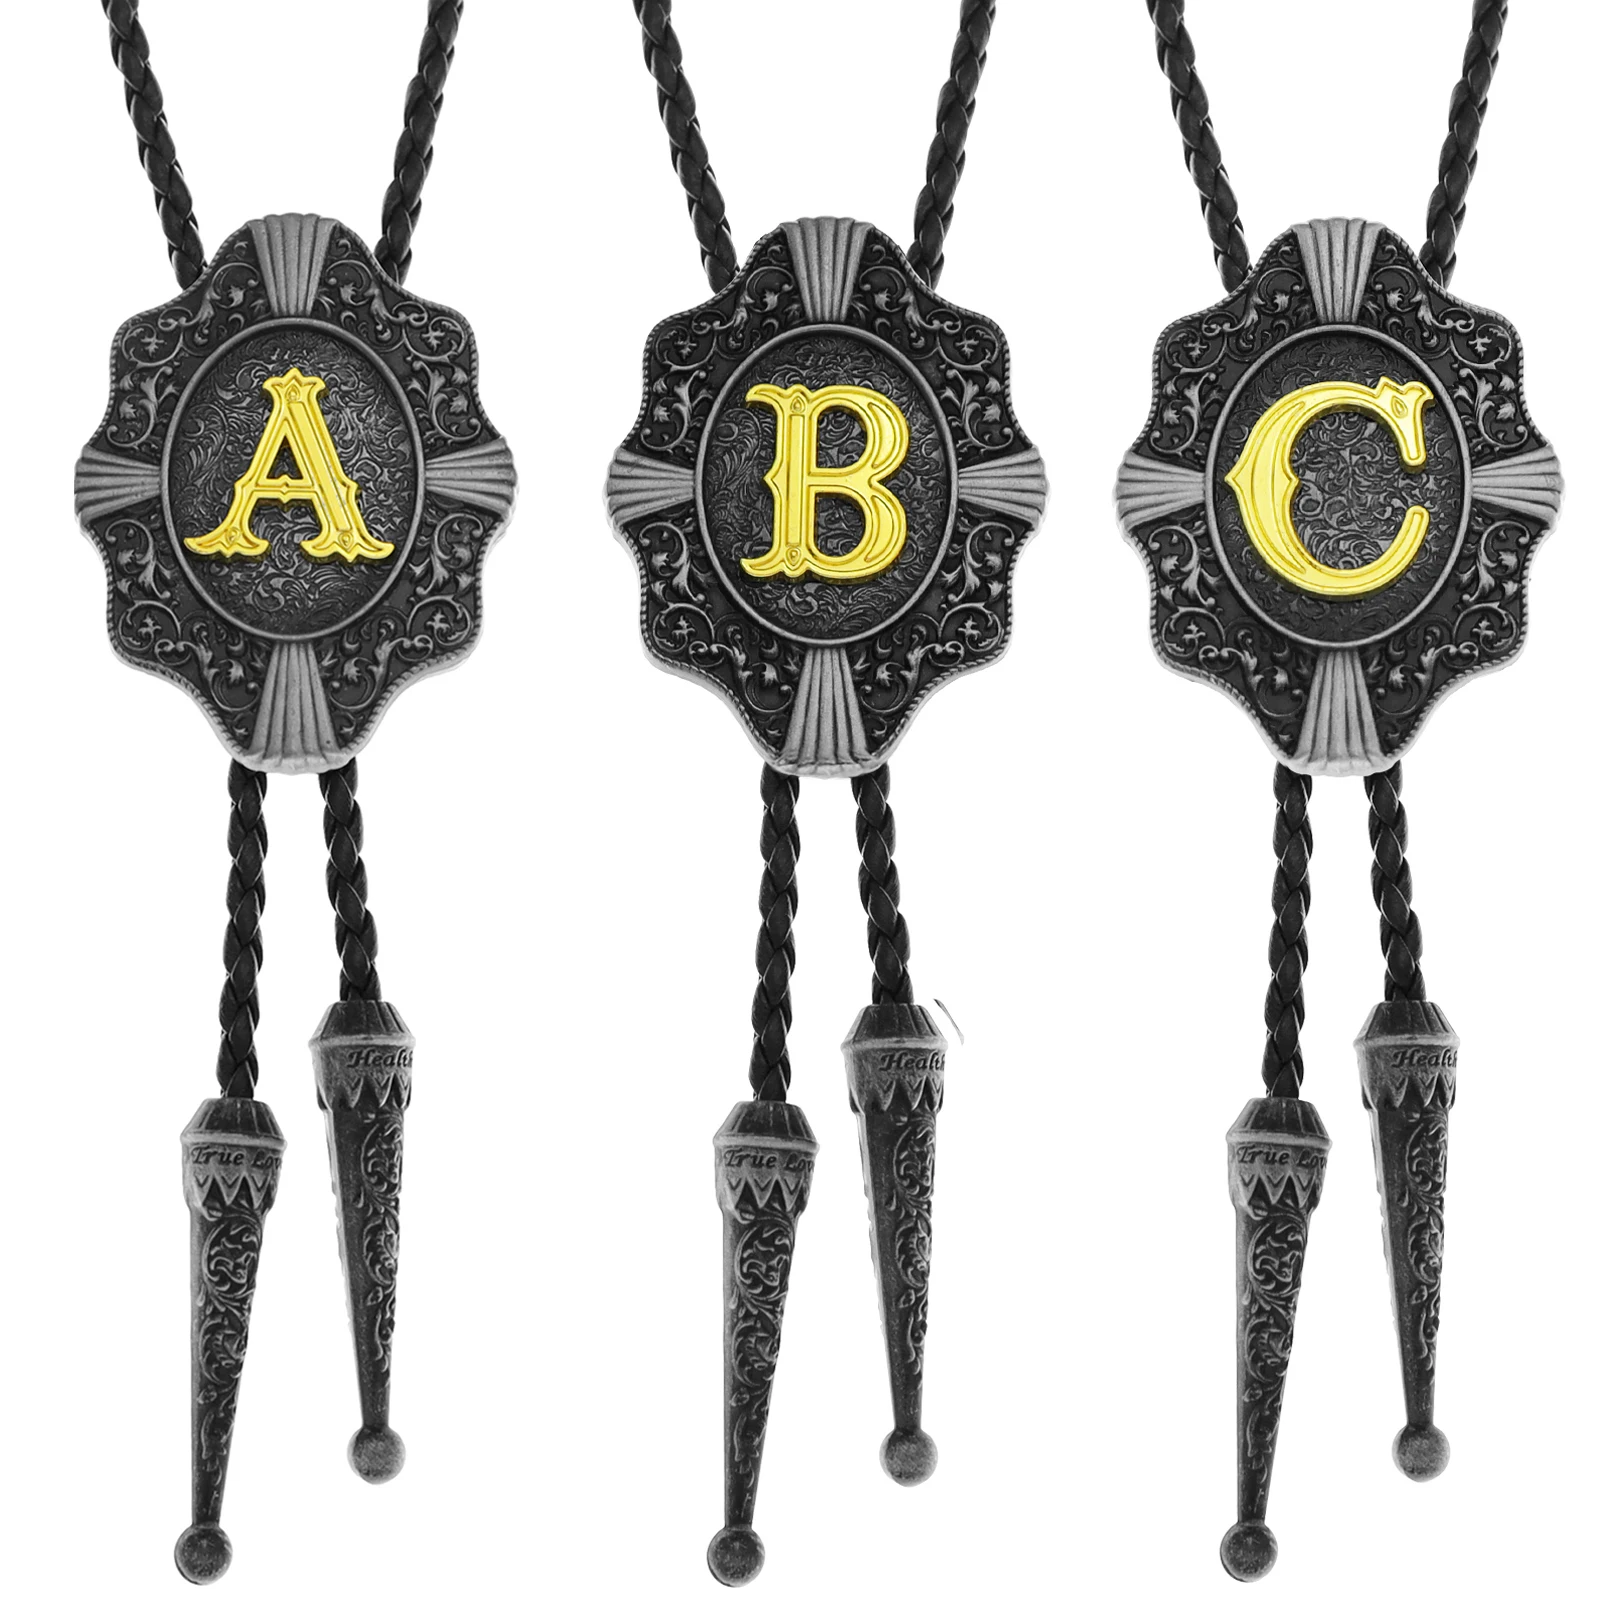 

26 Letters Necktie for Men Western Cowboys Bolo Ties Gold Color A To Z Pendant Leather Gravata Fashion Jewelry Accessories Gift